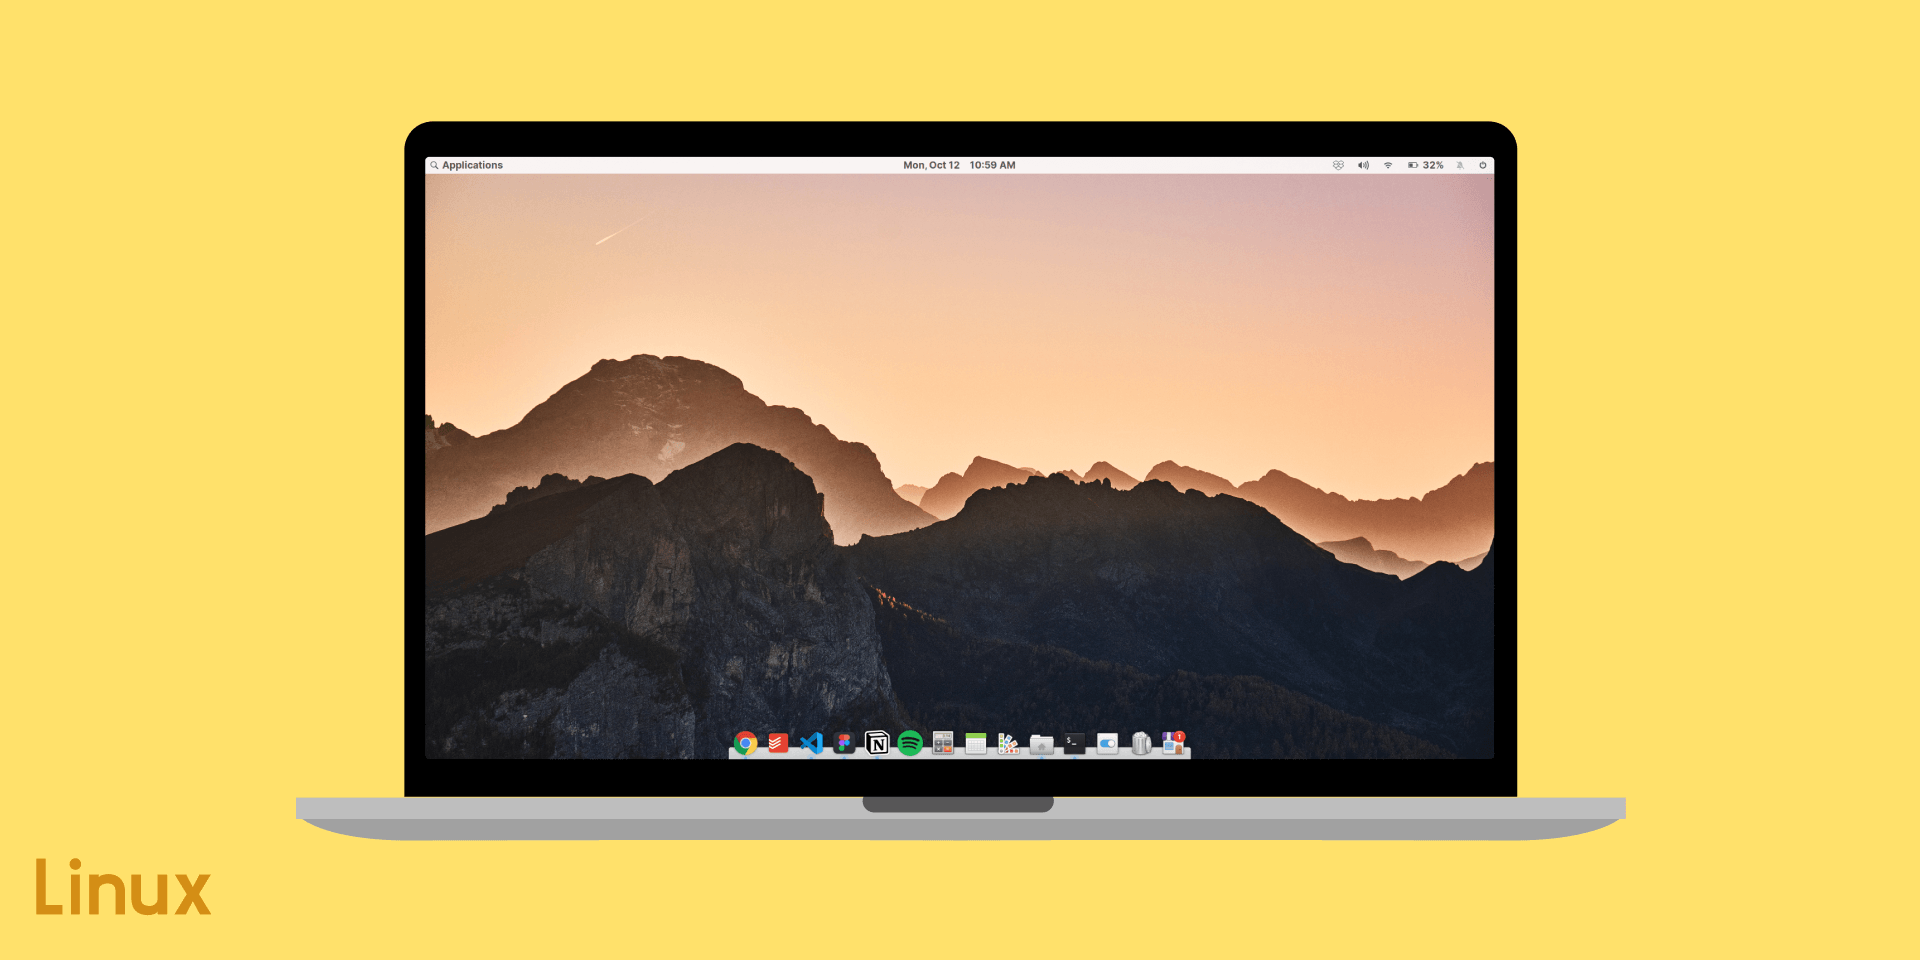 elementary OS Review: 8 Months later